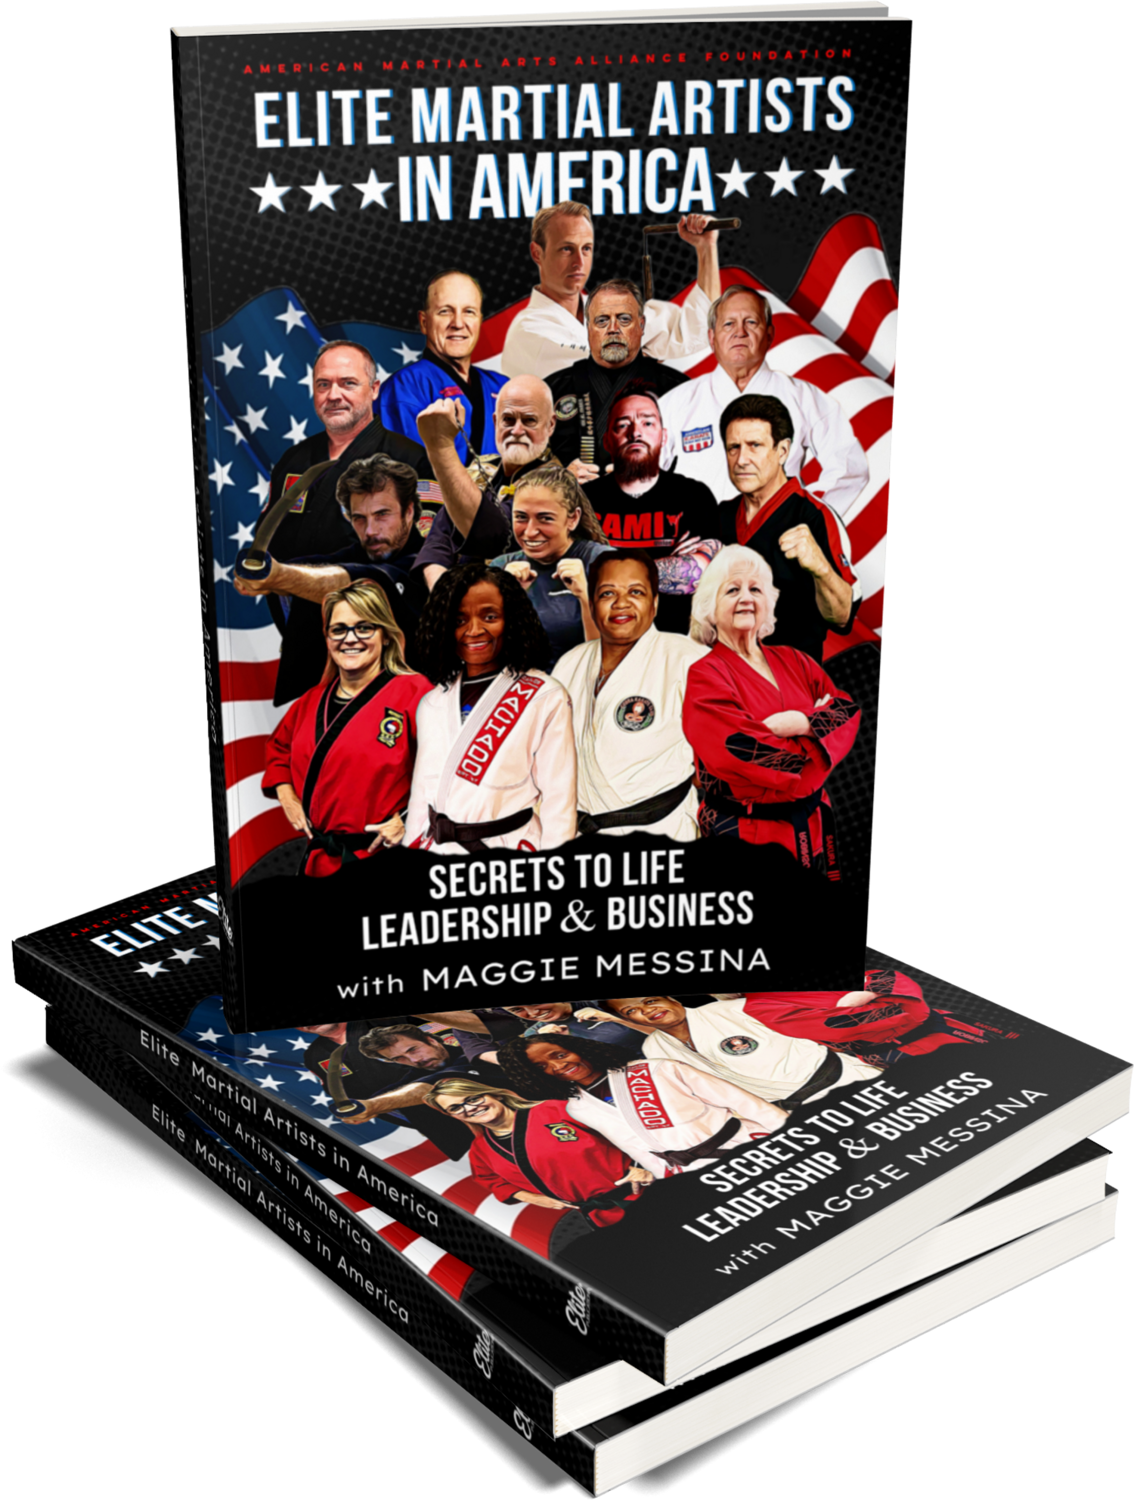 Elite Martial Artists In America: Secrets to Life, Leadership & Business - Maggie Messina co-author -Paperback